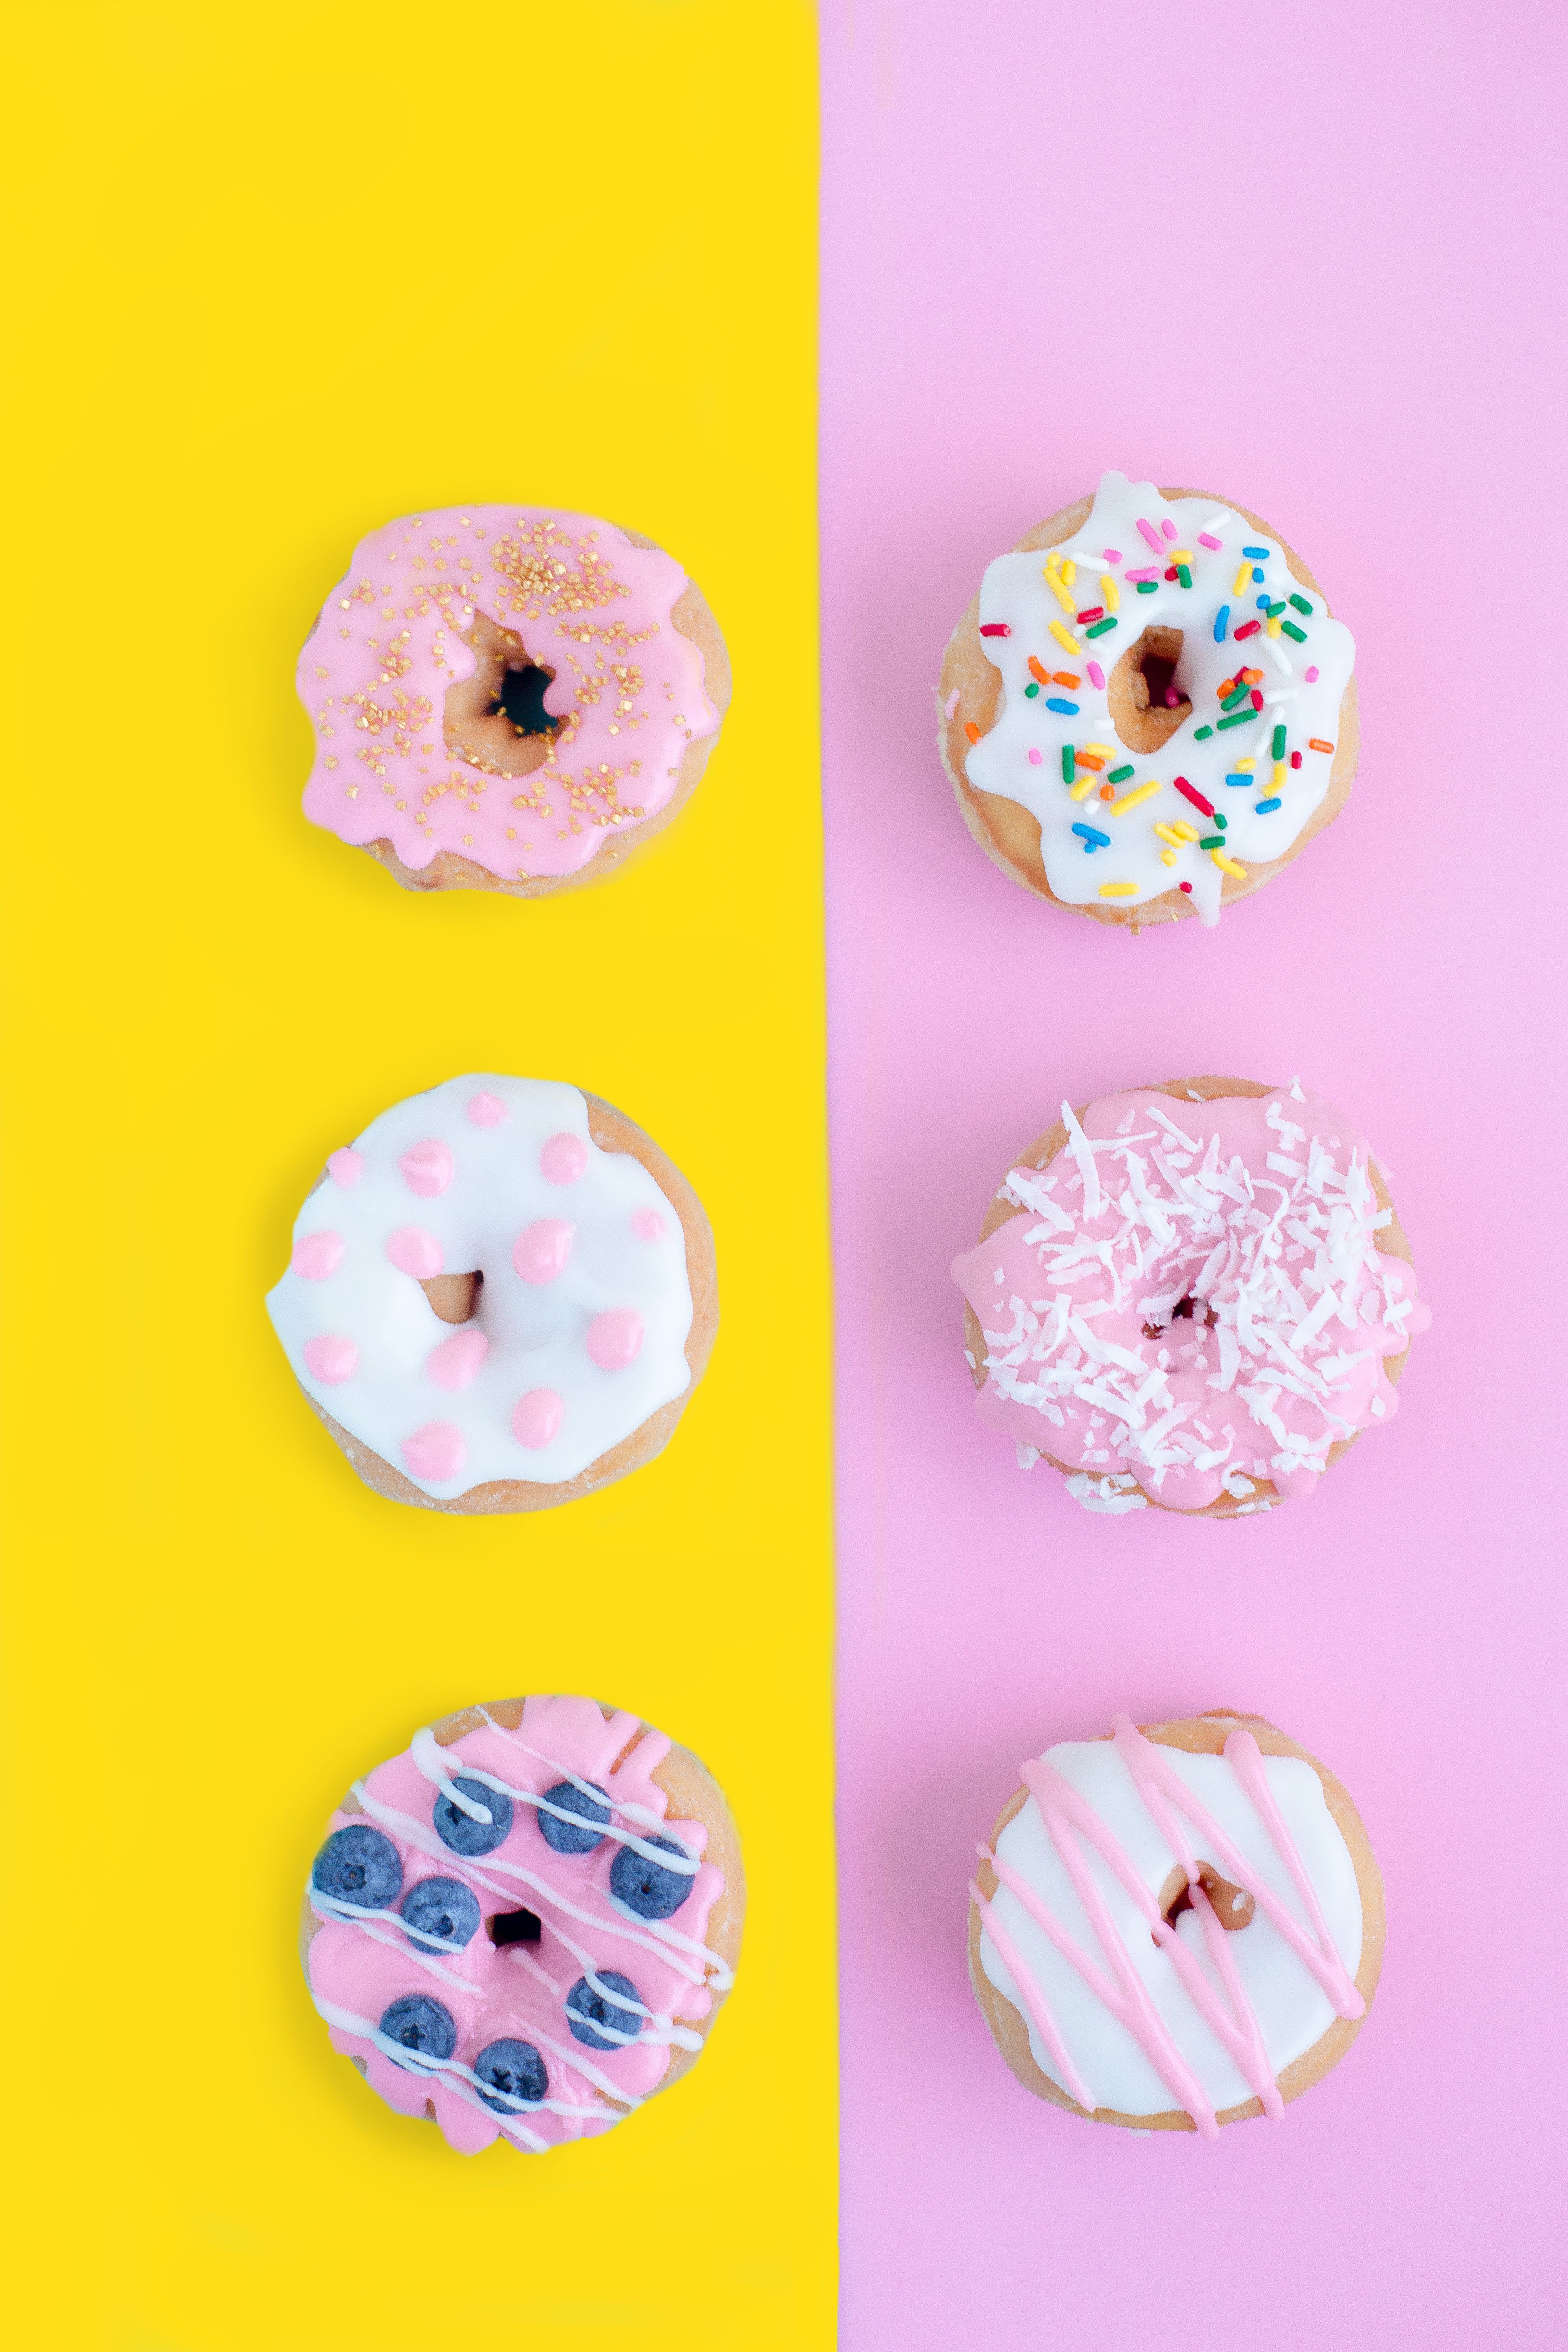 Lozquillas ideas. donuts, donut art, donut picture